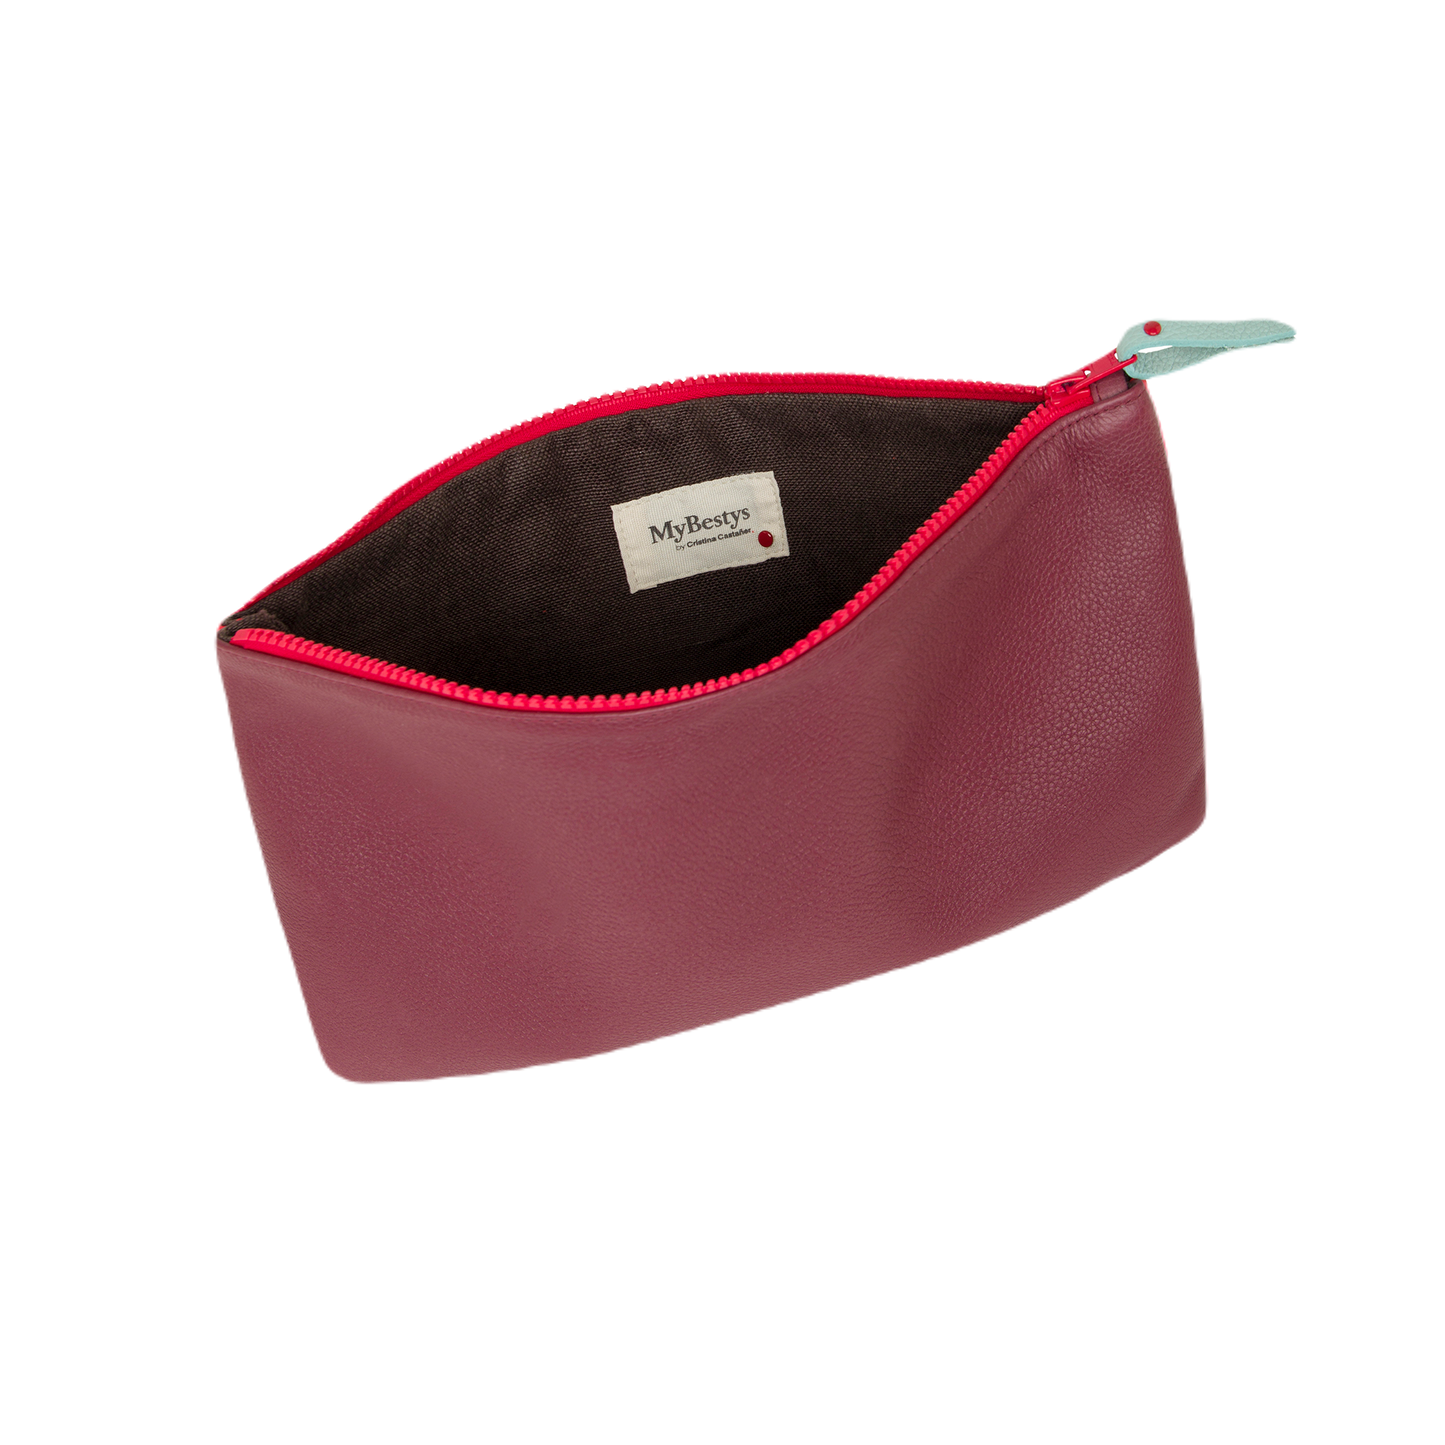 ZIP POUCH S Blue and Maroon